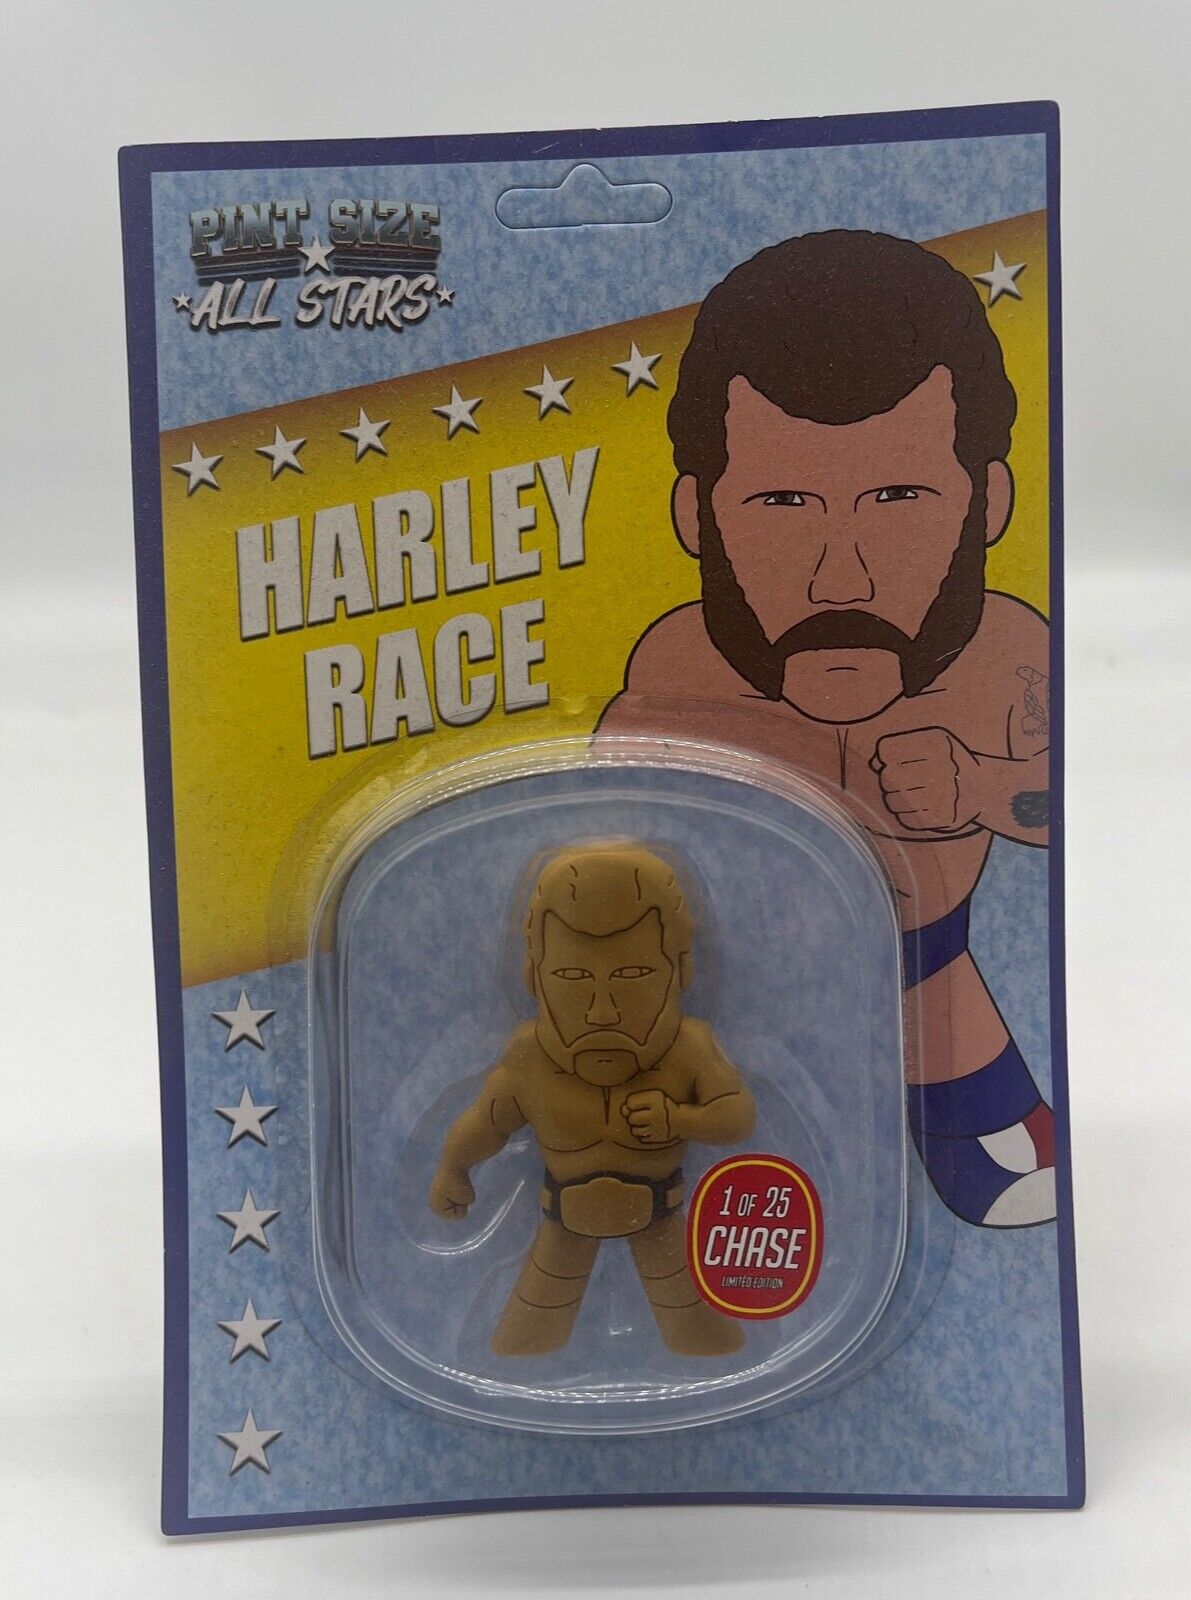 2021 Pro Wrestling Loot Pint Size All Stars Harley Race [March, Gold Chase]